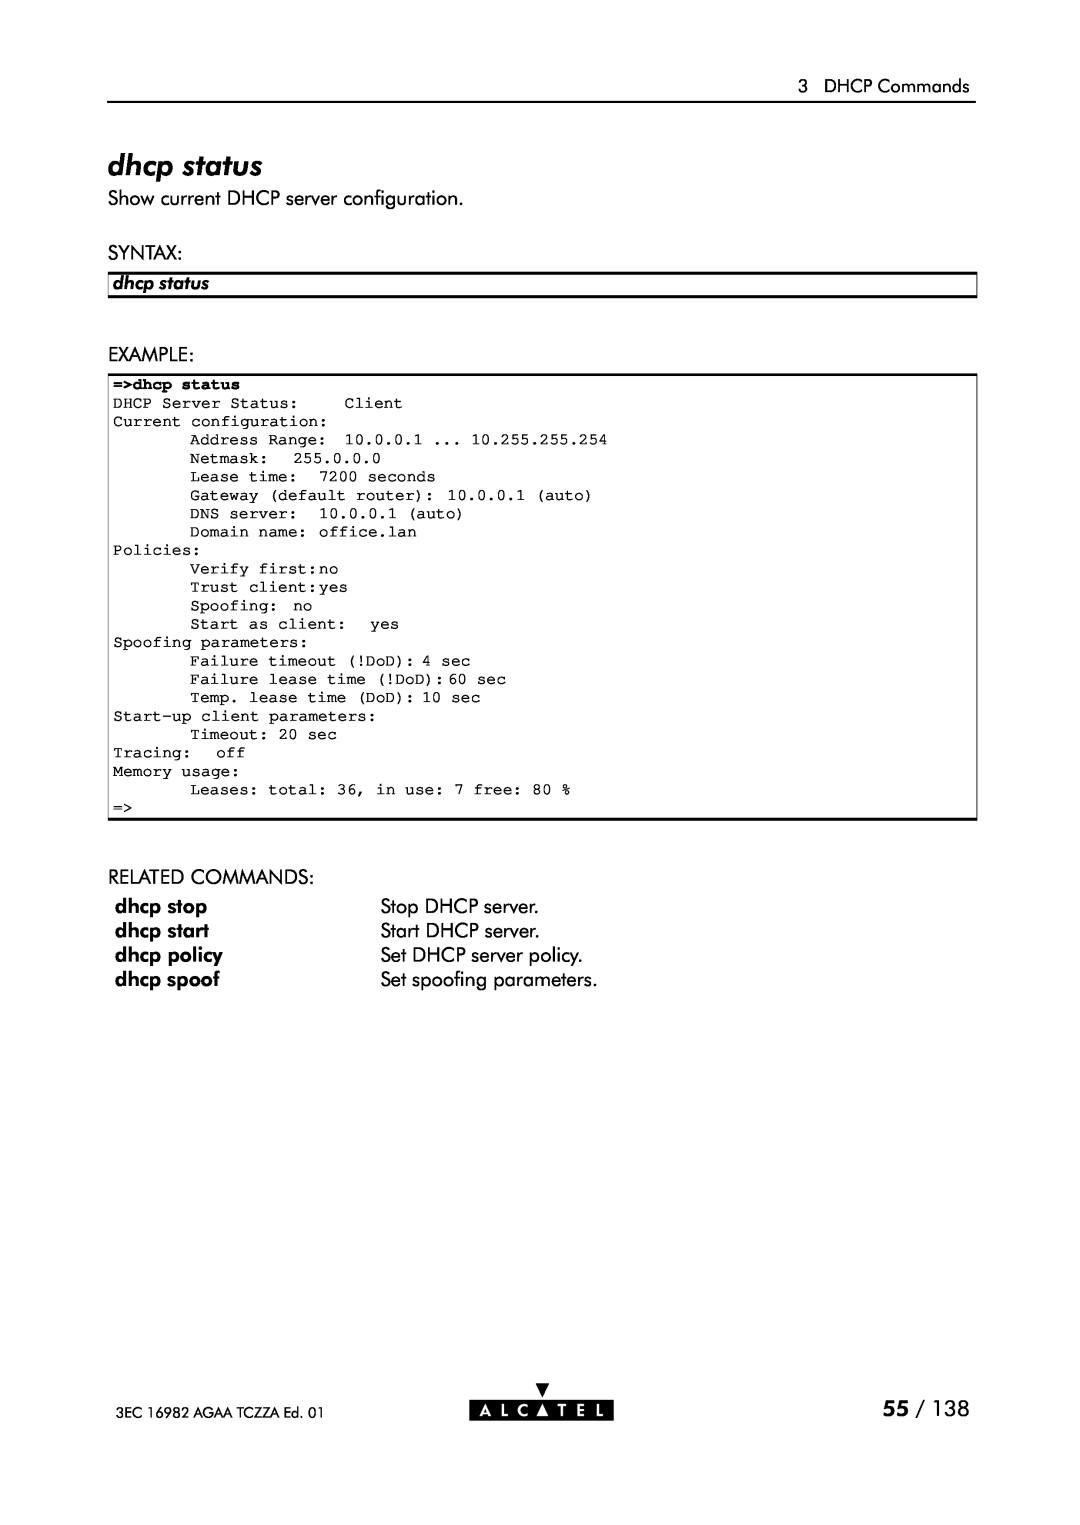 Alcatel Carrier Internetworking Solutions 350I manual dhcp status, Set spoofing parameters 